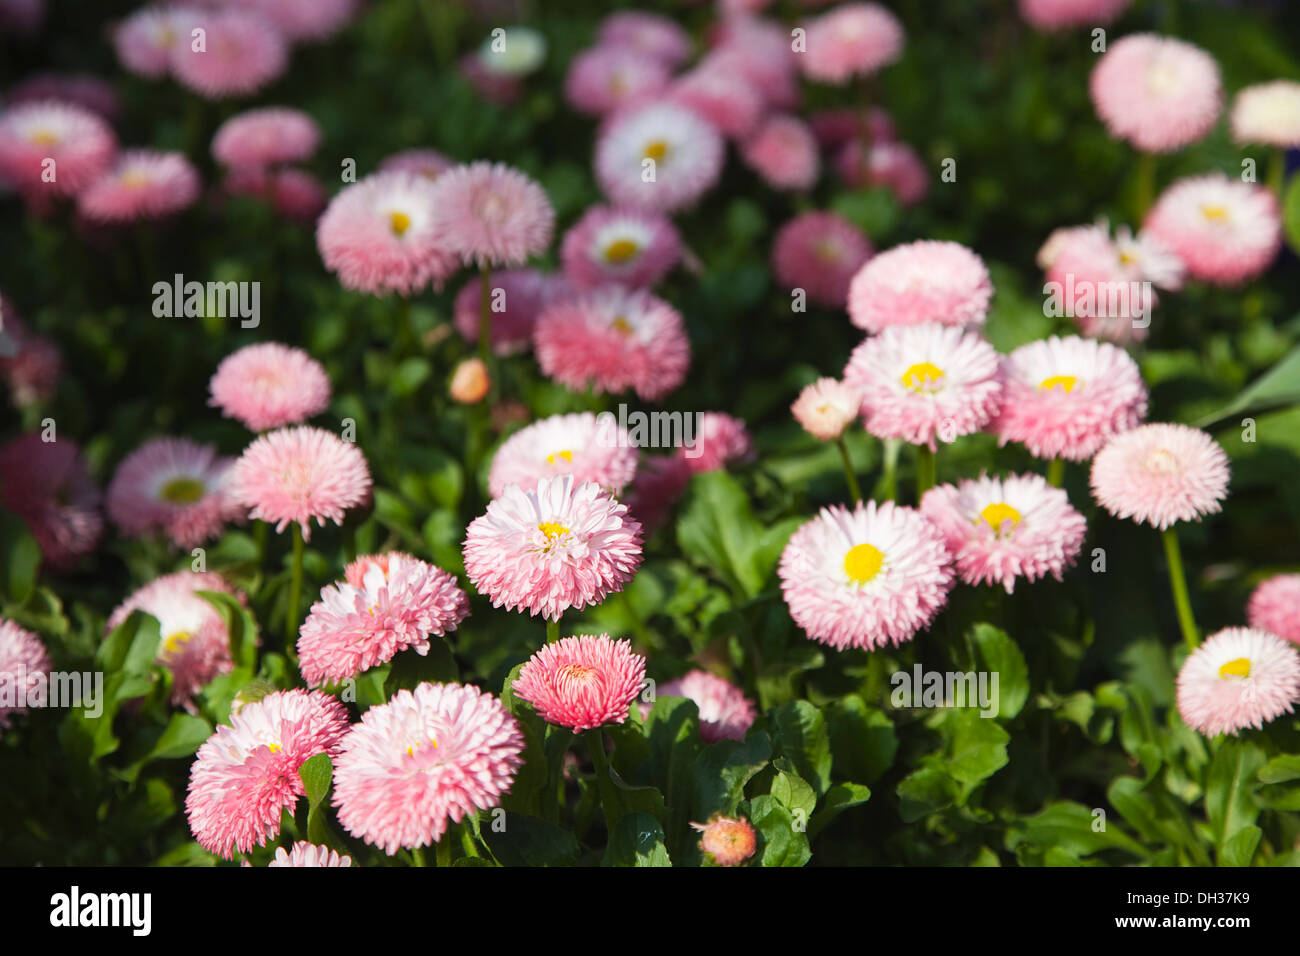 Daisy, Bellis perennis Tasso series. Pink double flower heads of perennial daisy carpeting area in public garden. Stock Photo